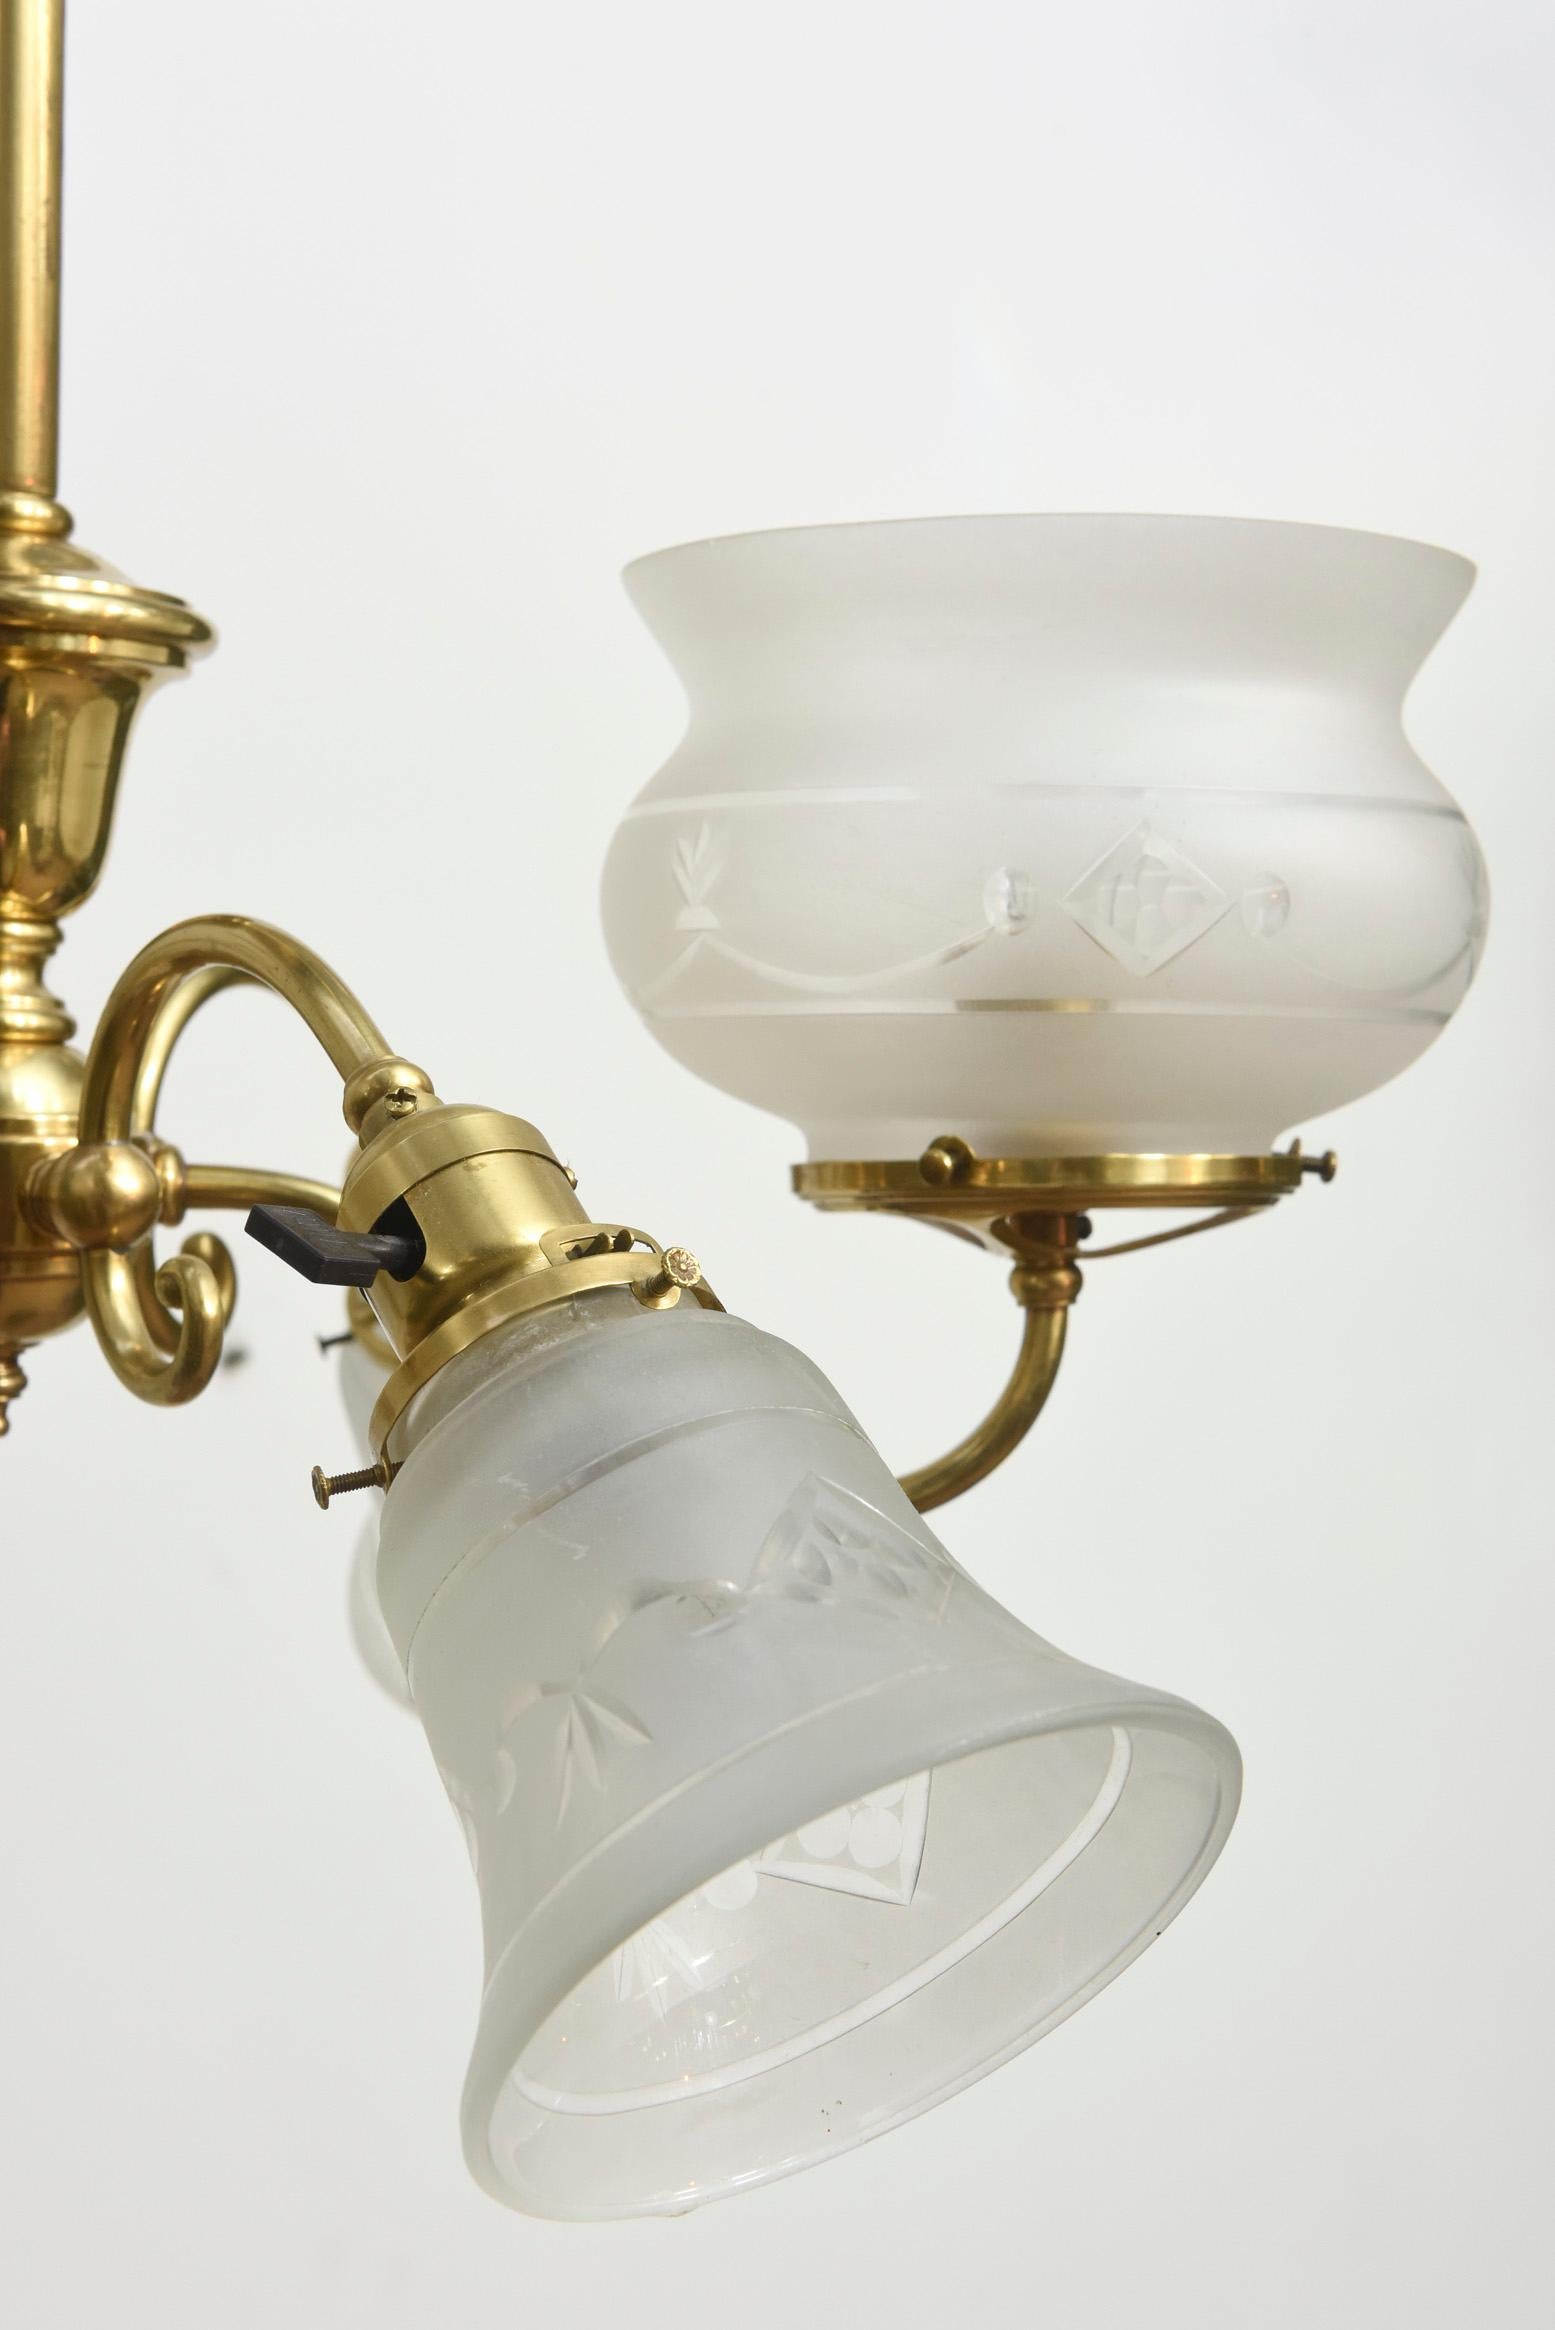 19th Century C145 Six Light Gas and Electric Fixture